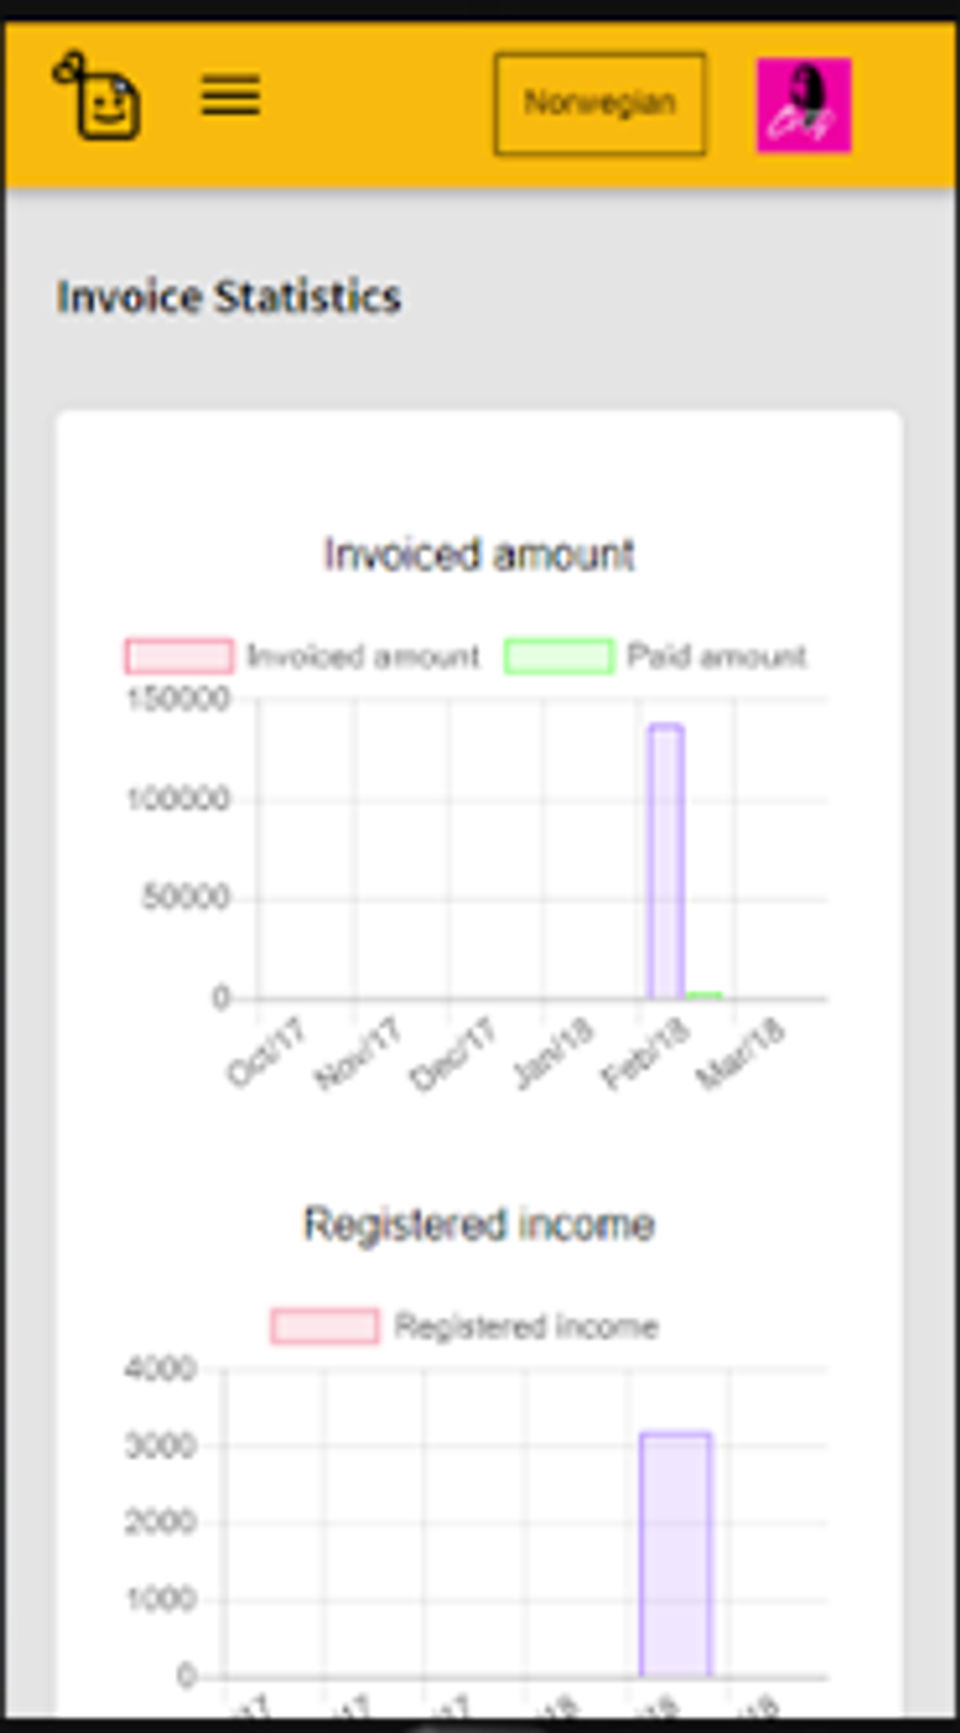 BeeBills screenshot: Users have access to reports on invoice statistics